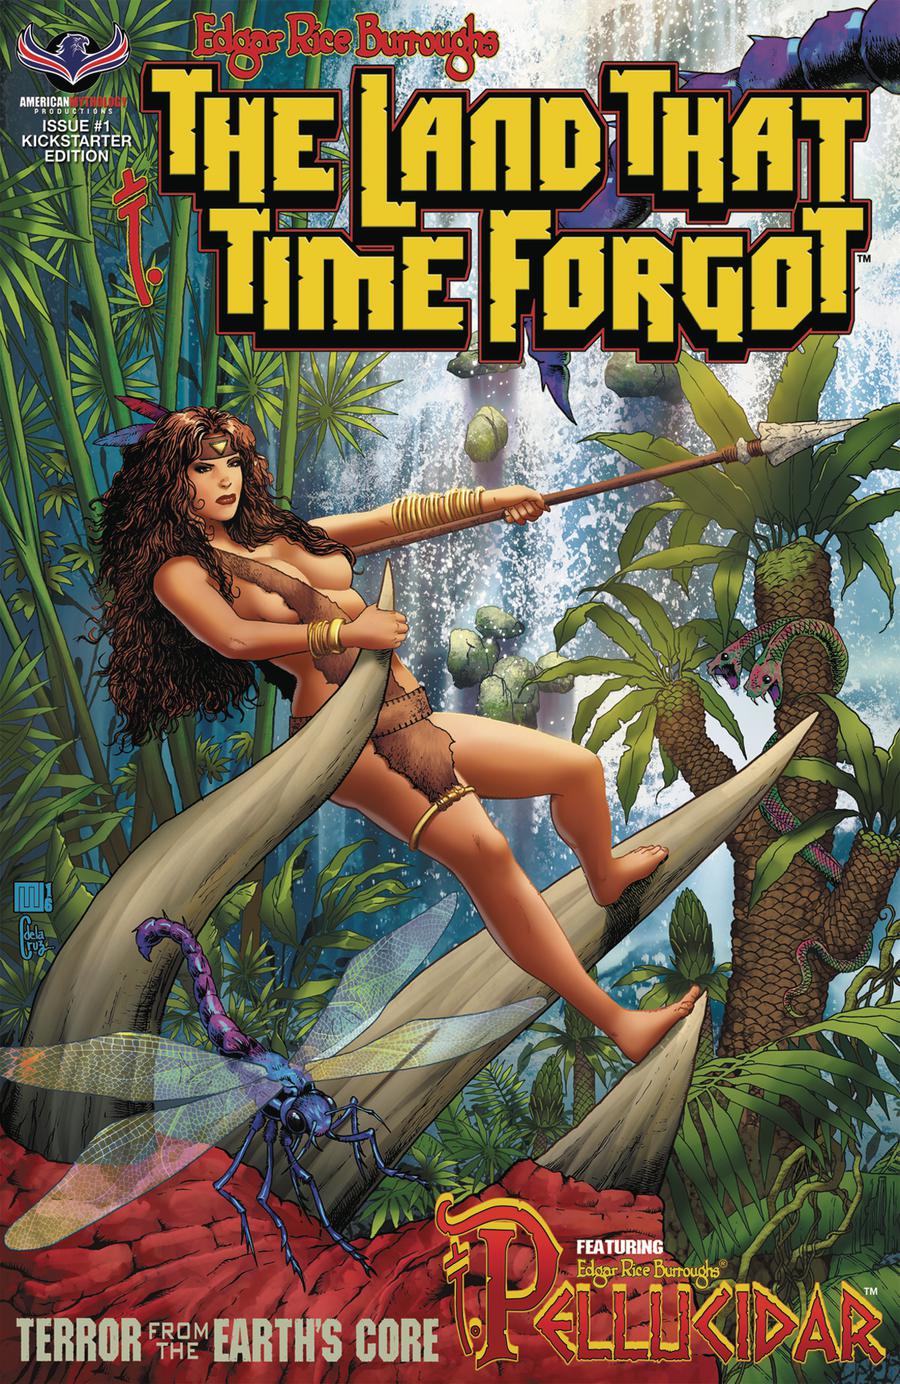 Edgar Rice Burroughs Land That Time Forgot Terror From The Earths Core #1 Cover D Variant Kickstarter Cover Signed By Mike Wolfer